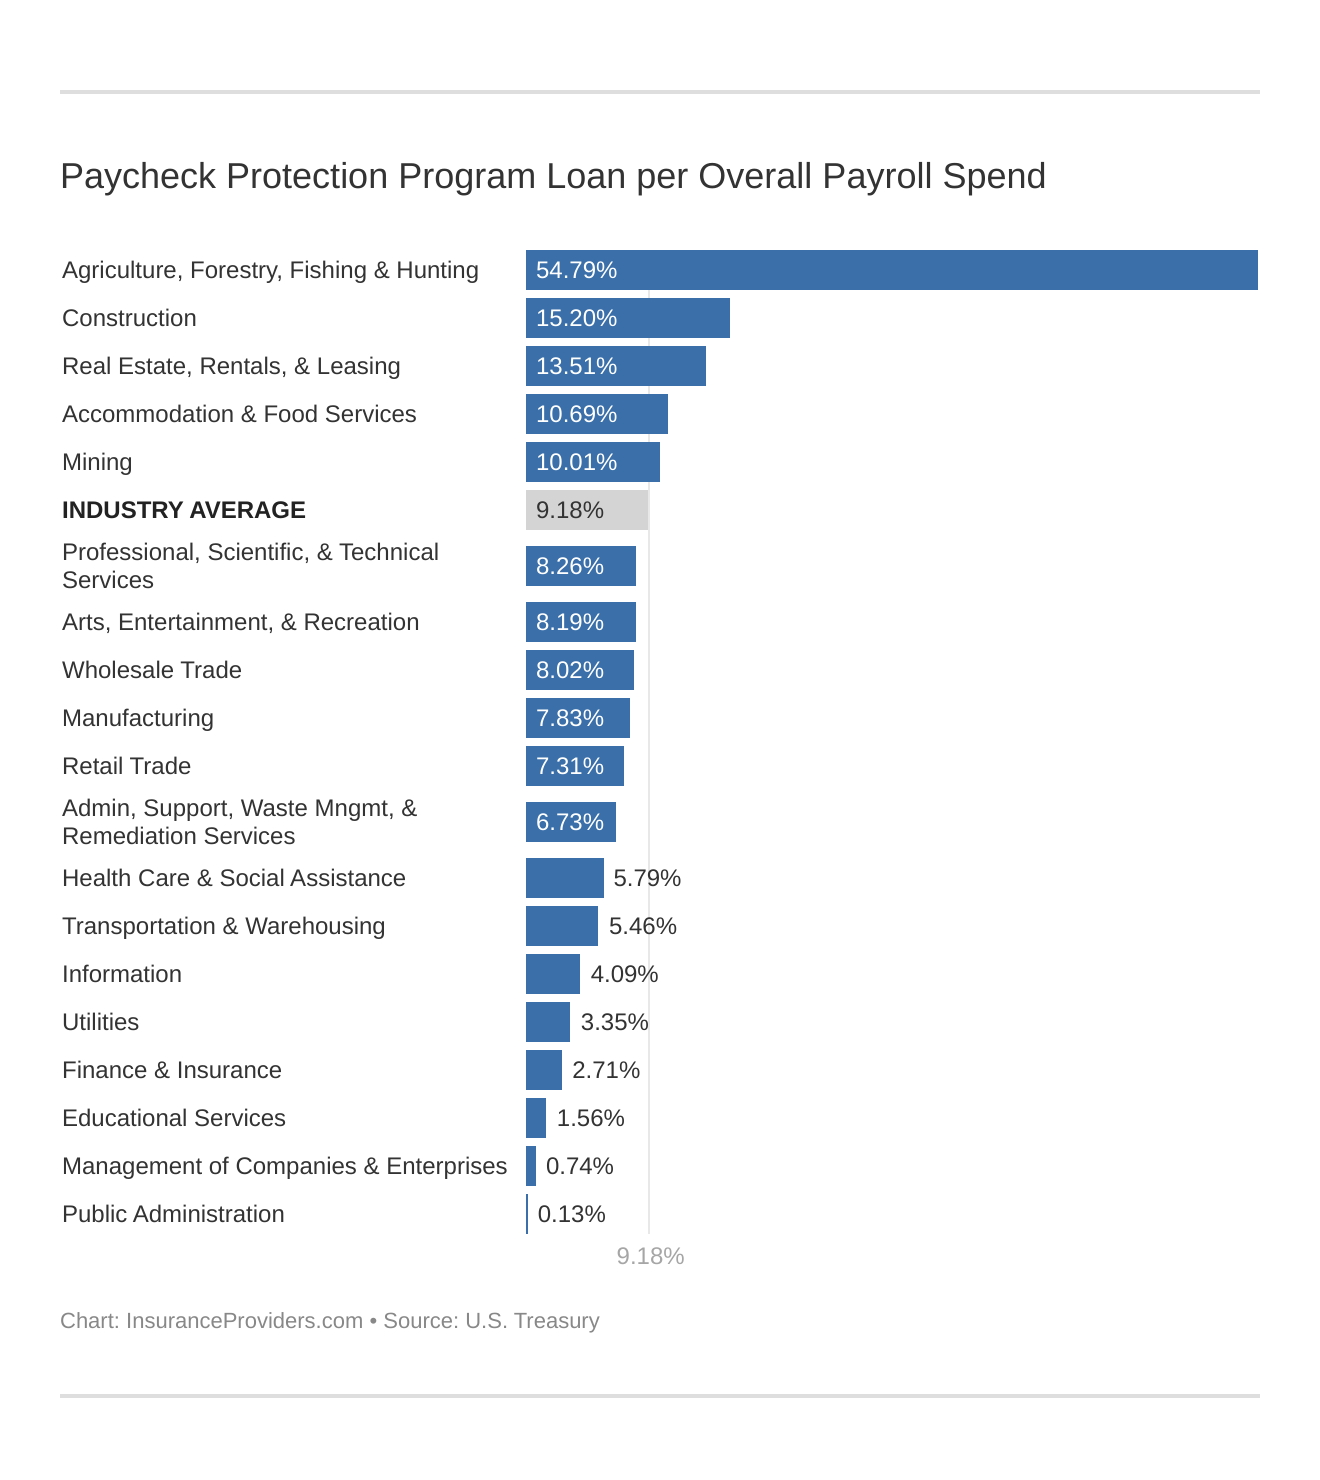 Paycheck Protection Program Loan per Overall Payroll Spend